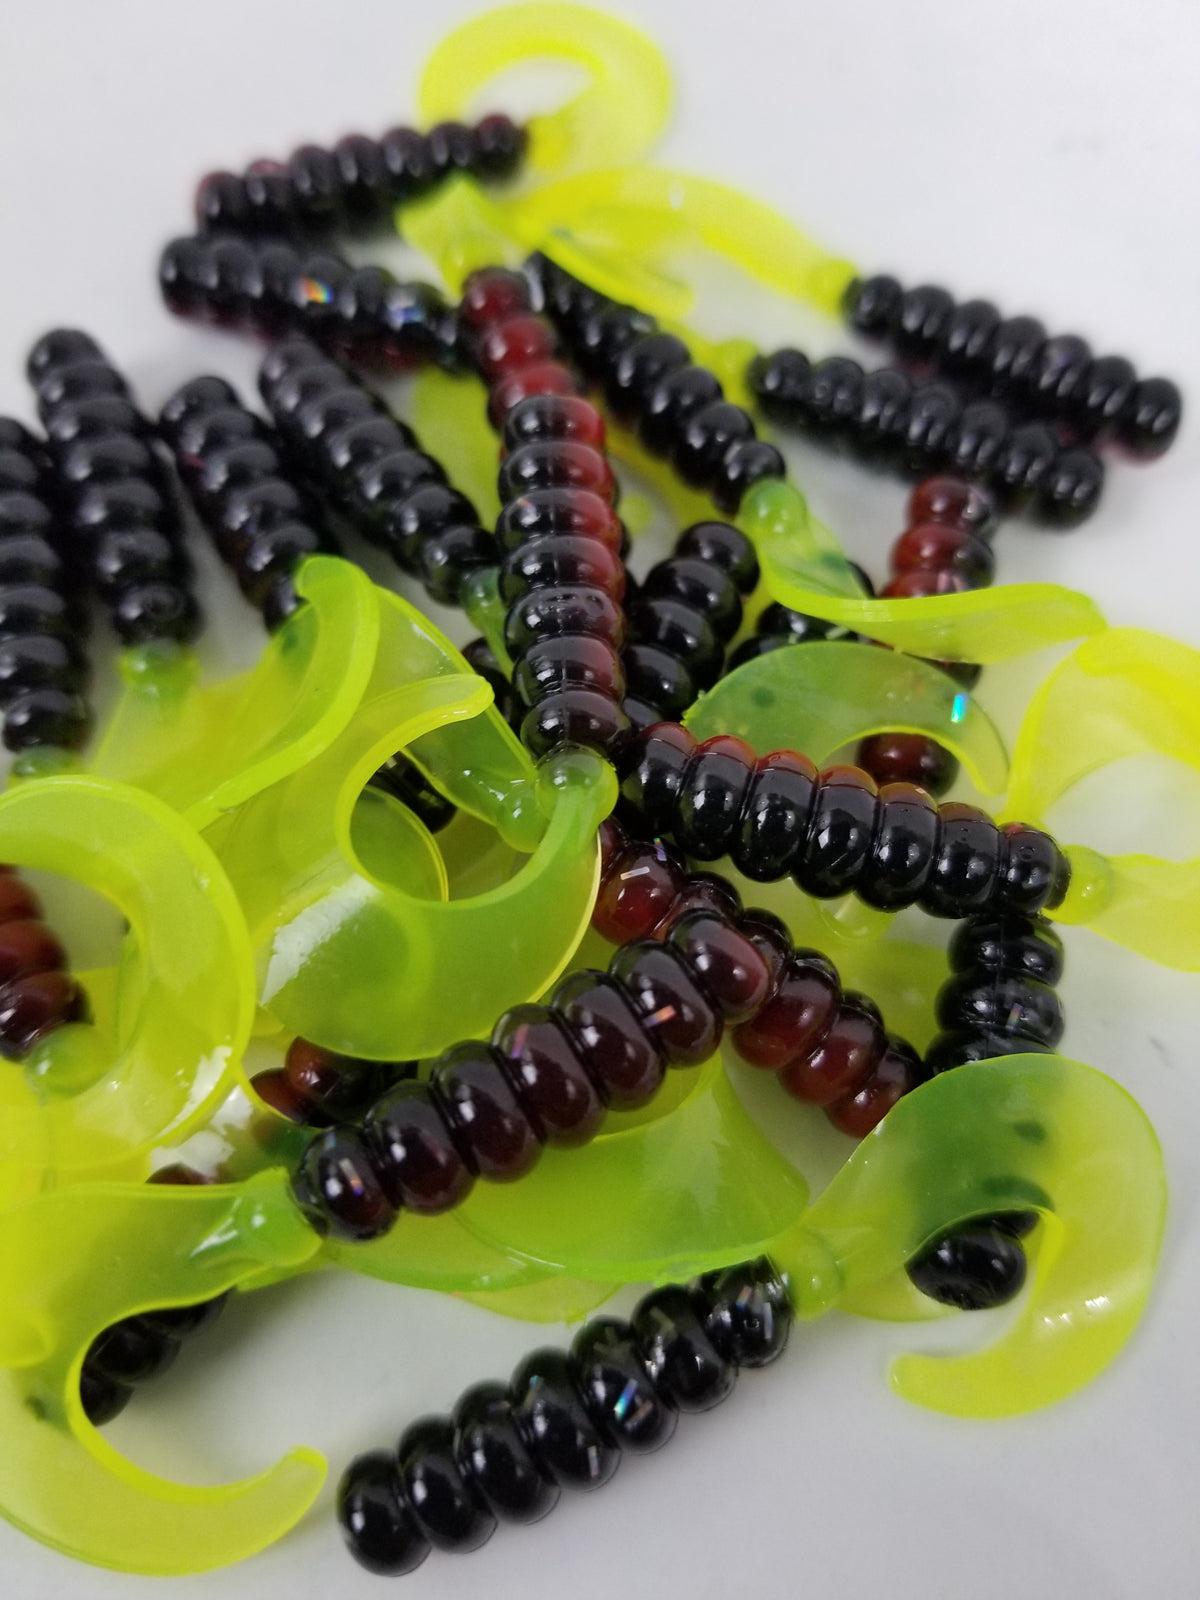 Cam's 2"(HOLOGRAM FLAKE)  Curly Tail Grub 40pc Red Black & Chartreuse Curly Tail Crappie Soft Jigs  [A Cam's Exclusive]